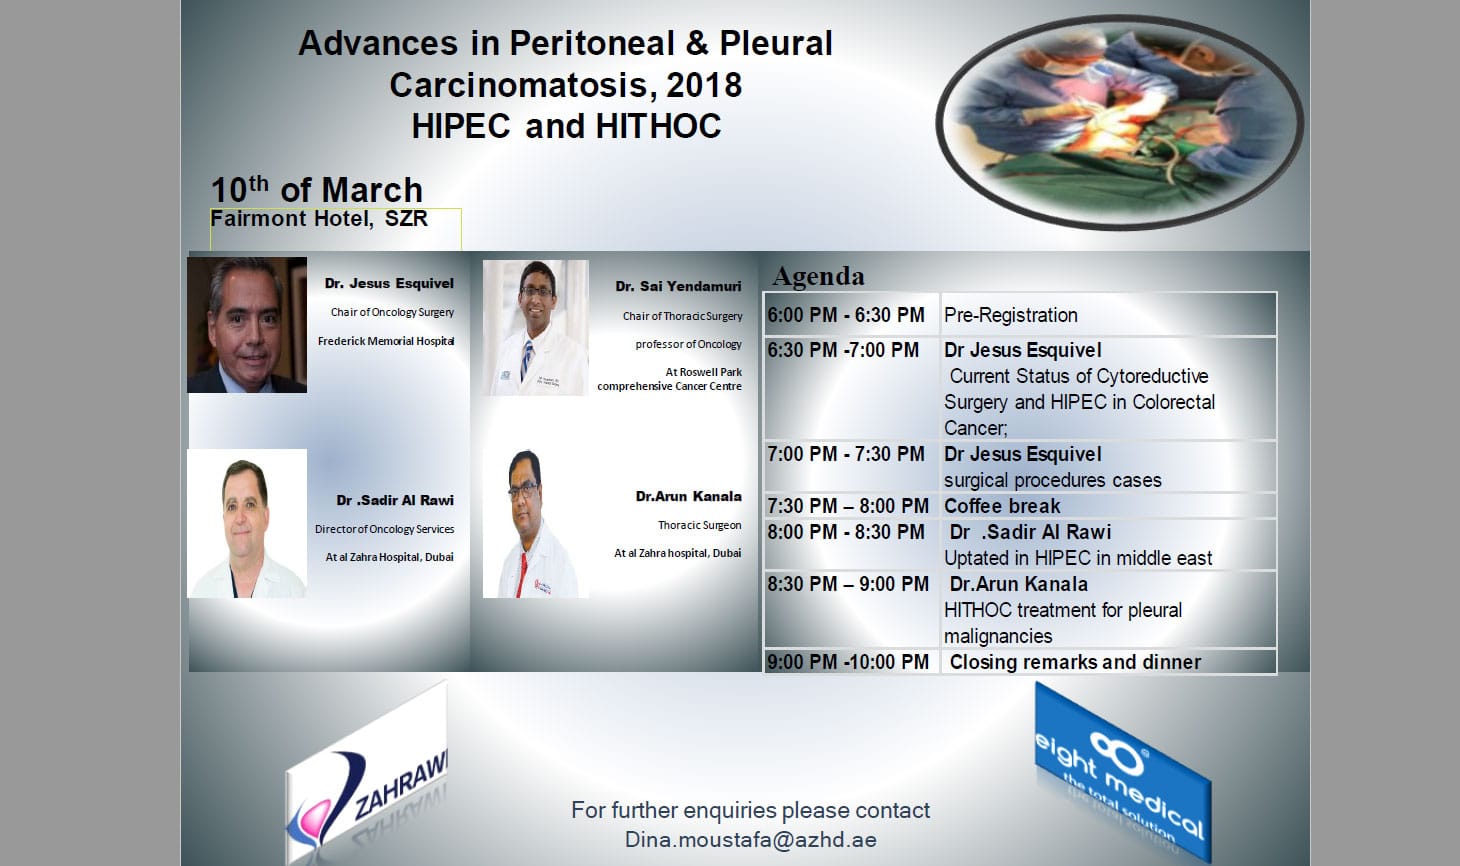 Seminar about hipec and hithoc in Dubai